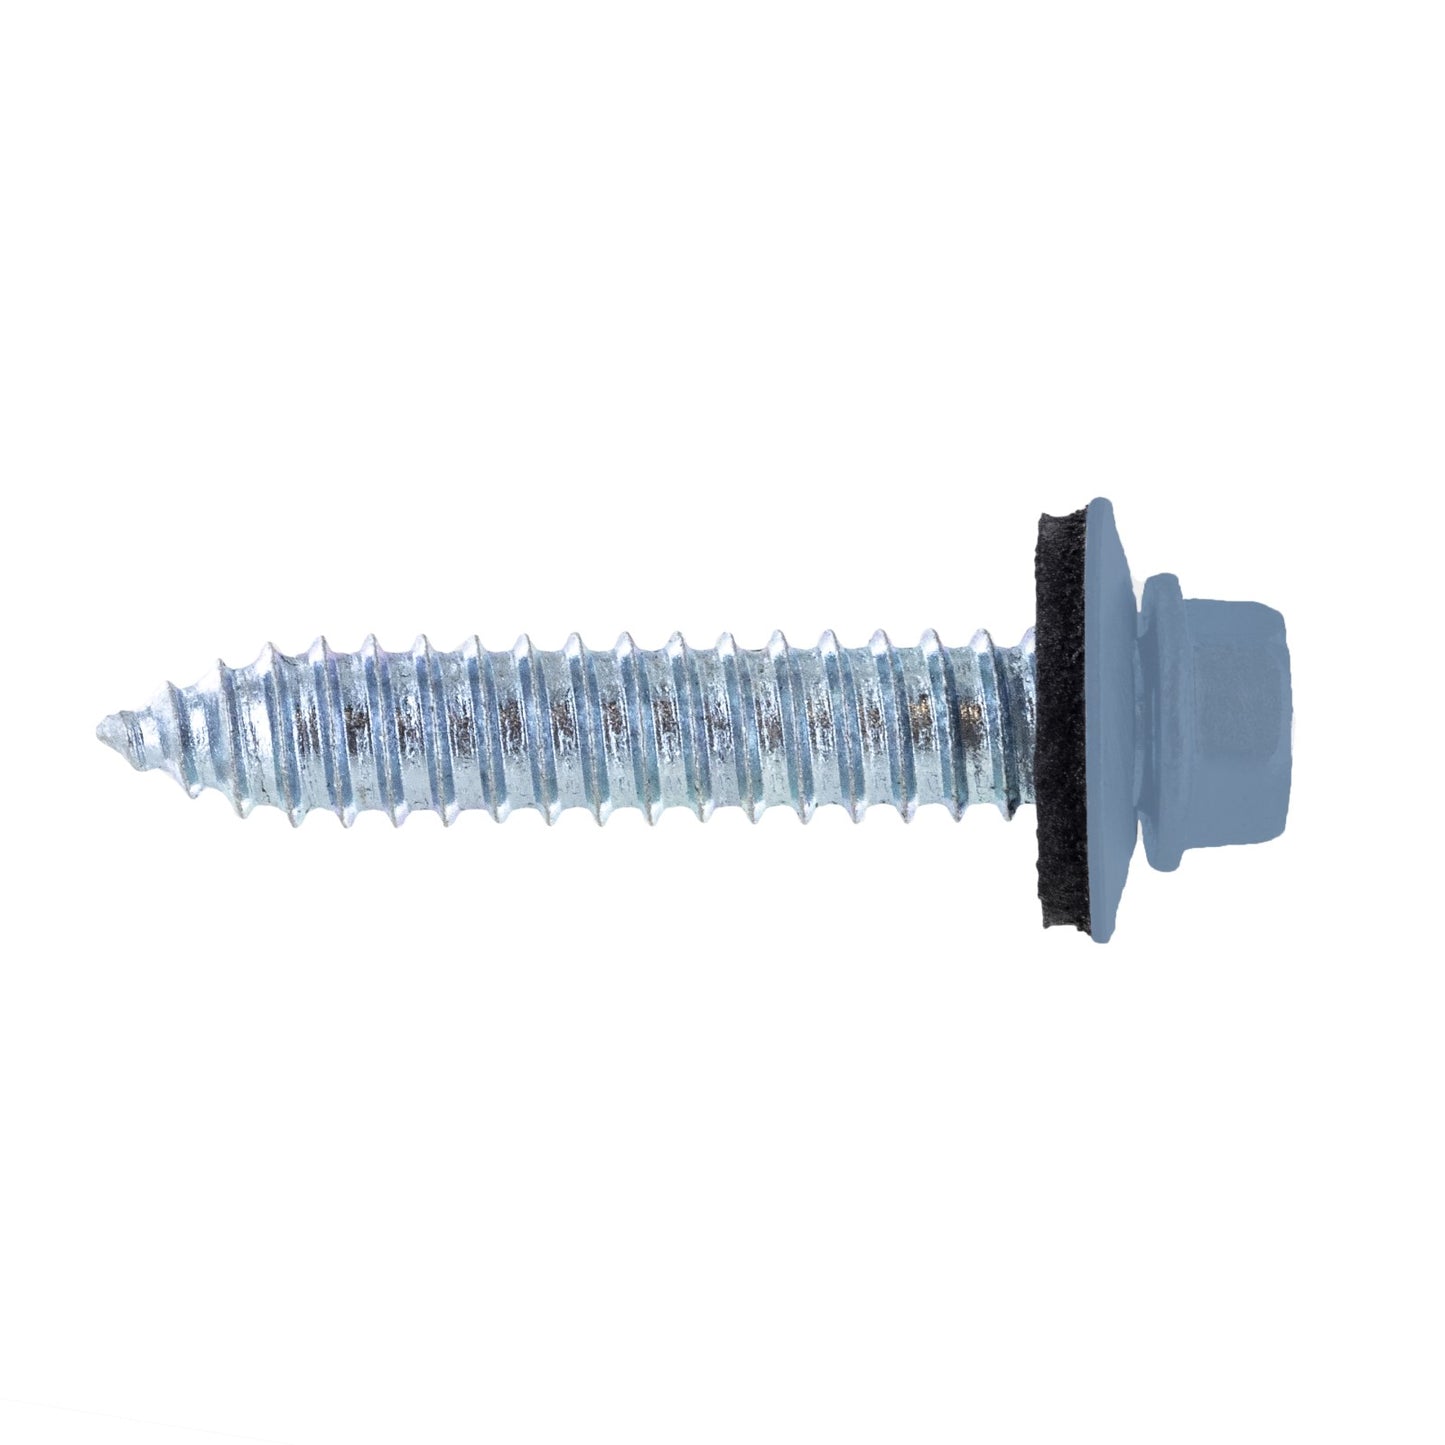 #17 x 1-1/2" Tapping Steelbinder Metal Roofing Screw - Blue - Pkg 250